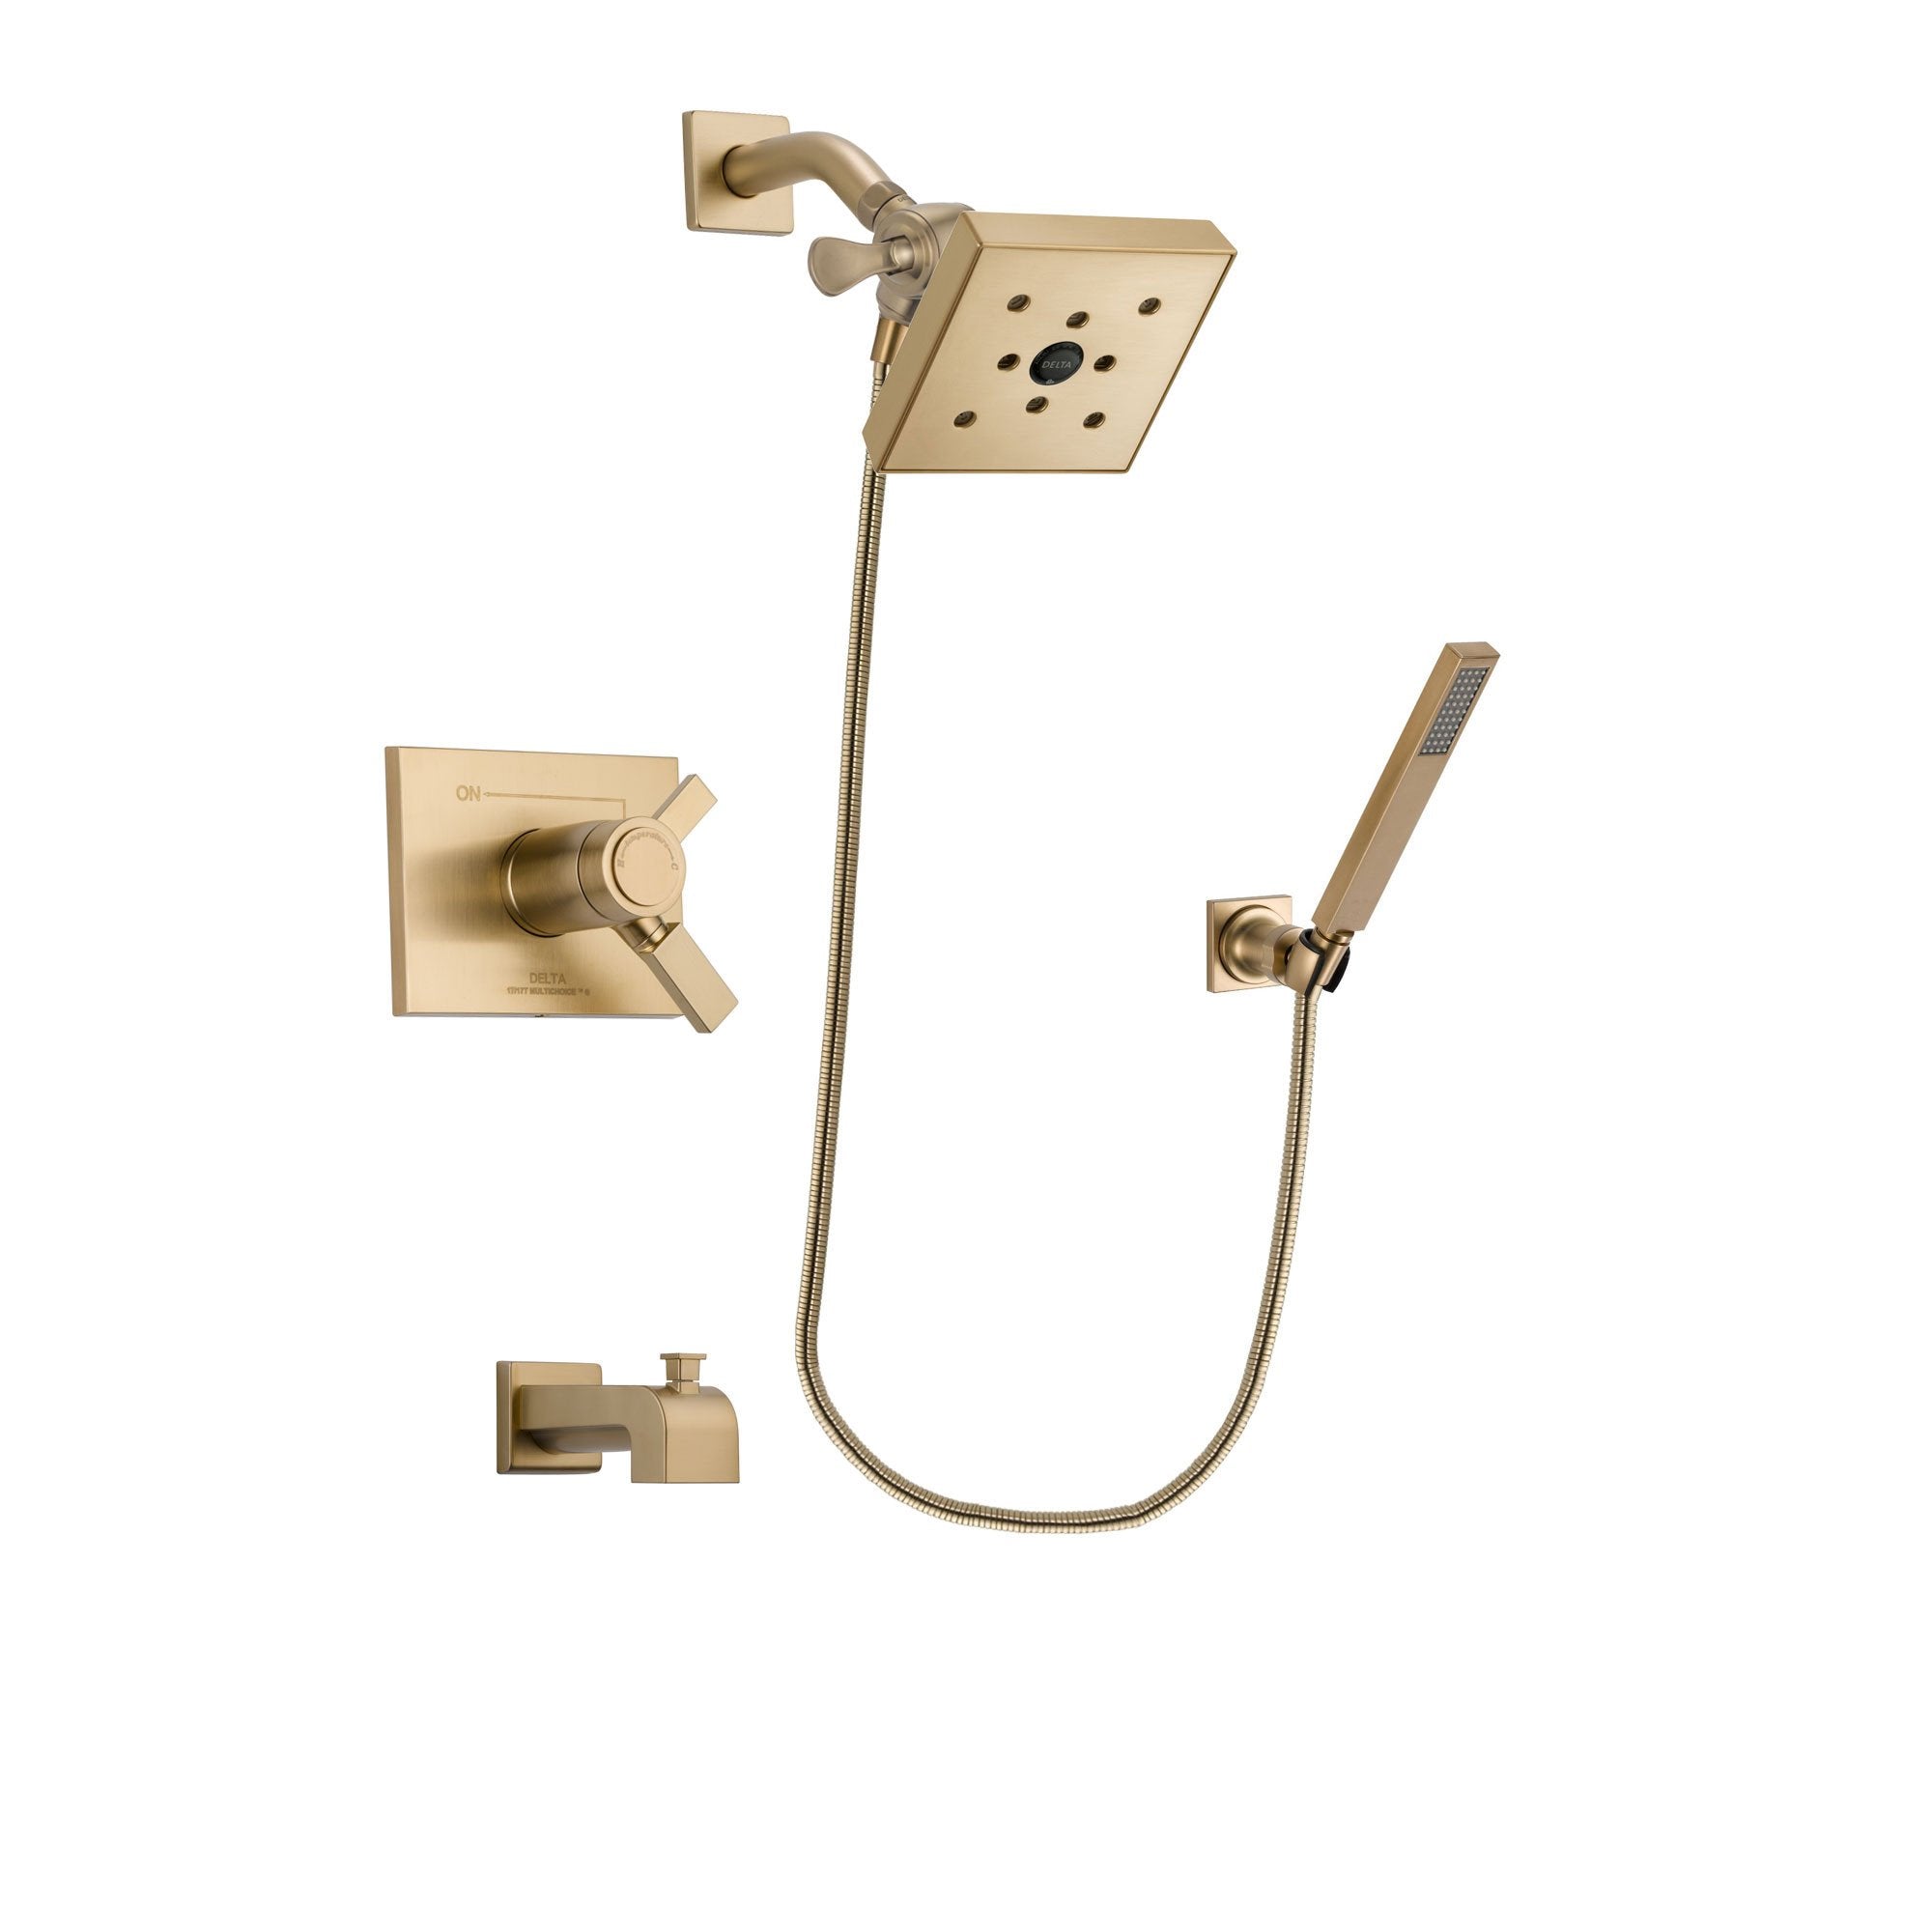 Delta Vero Champagne Bronze Finish Thermostatic Tub and Shower Faucet System Package with Square Shower Head and Modern Wall-Mount Handheld Shower Stick Includes Rough-in Valve and Tub Spout DSP3899V